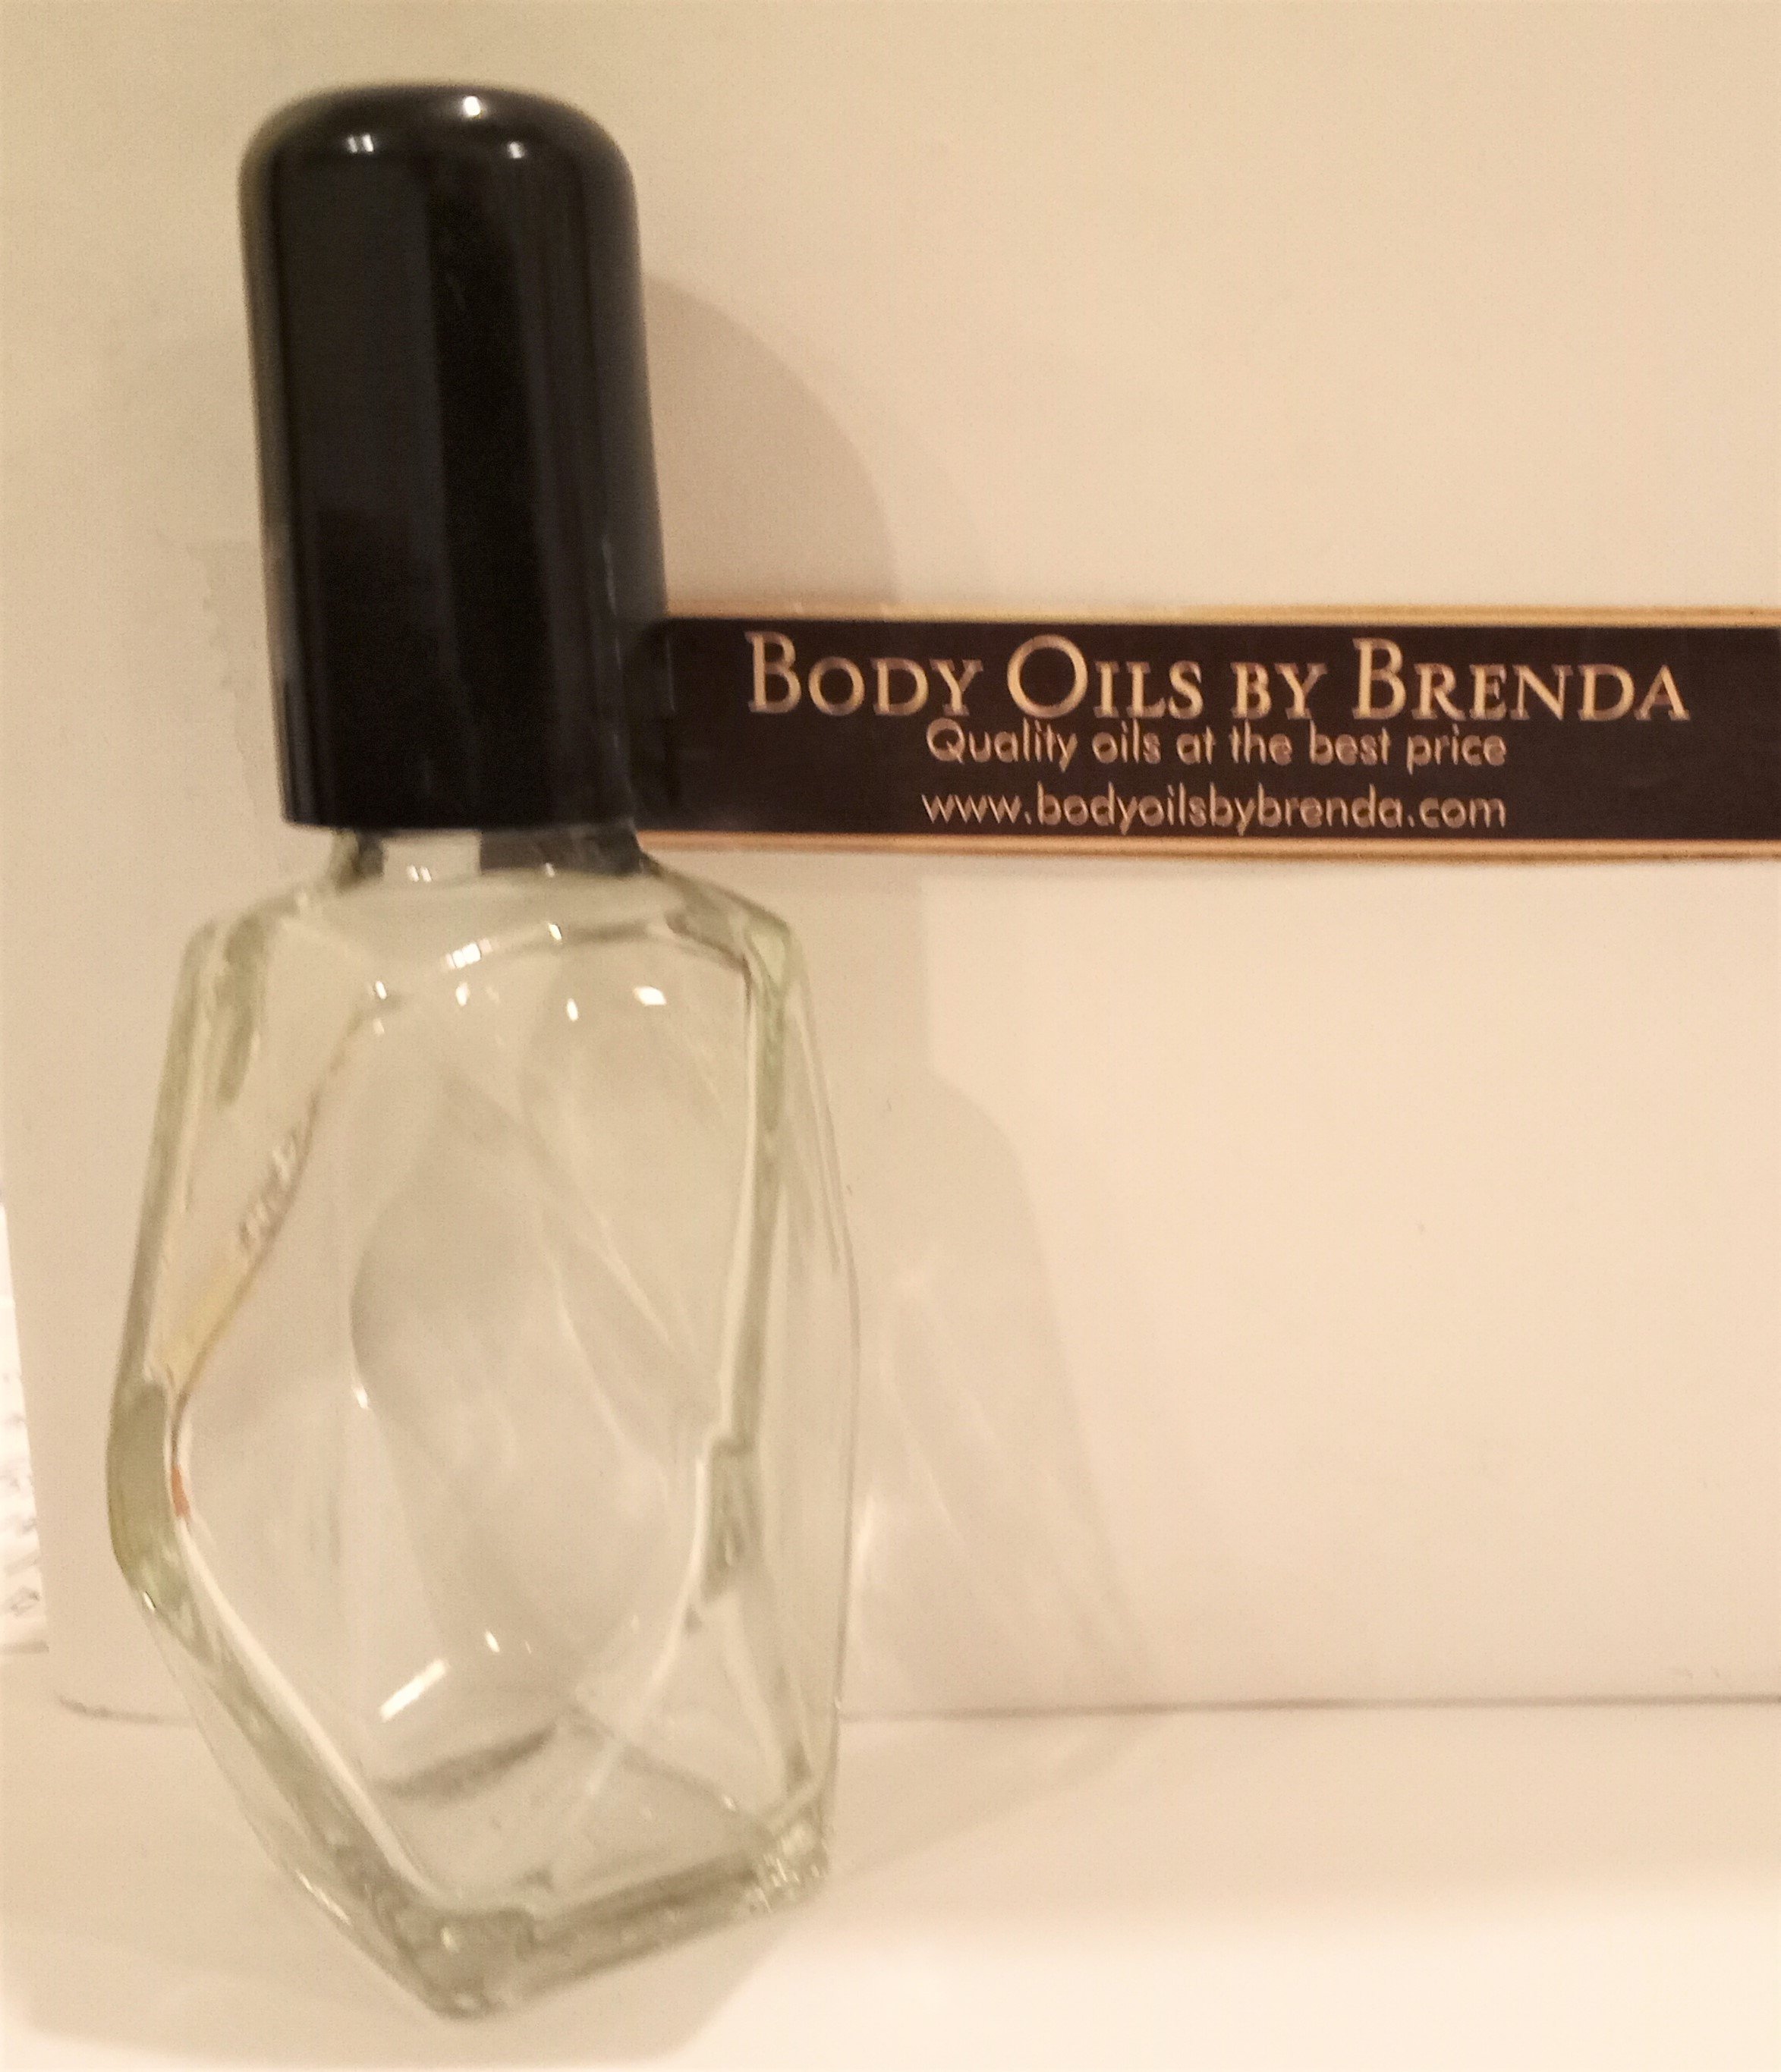 White Oud SP Alcohol Free Scented Oil #MP006